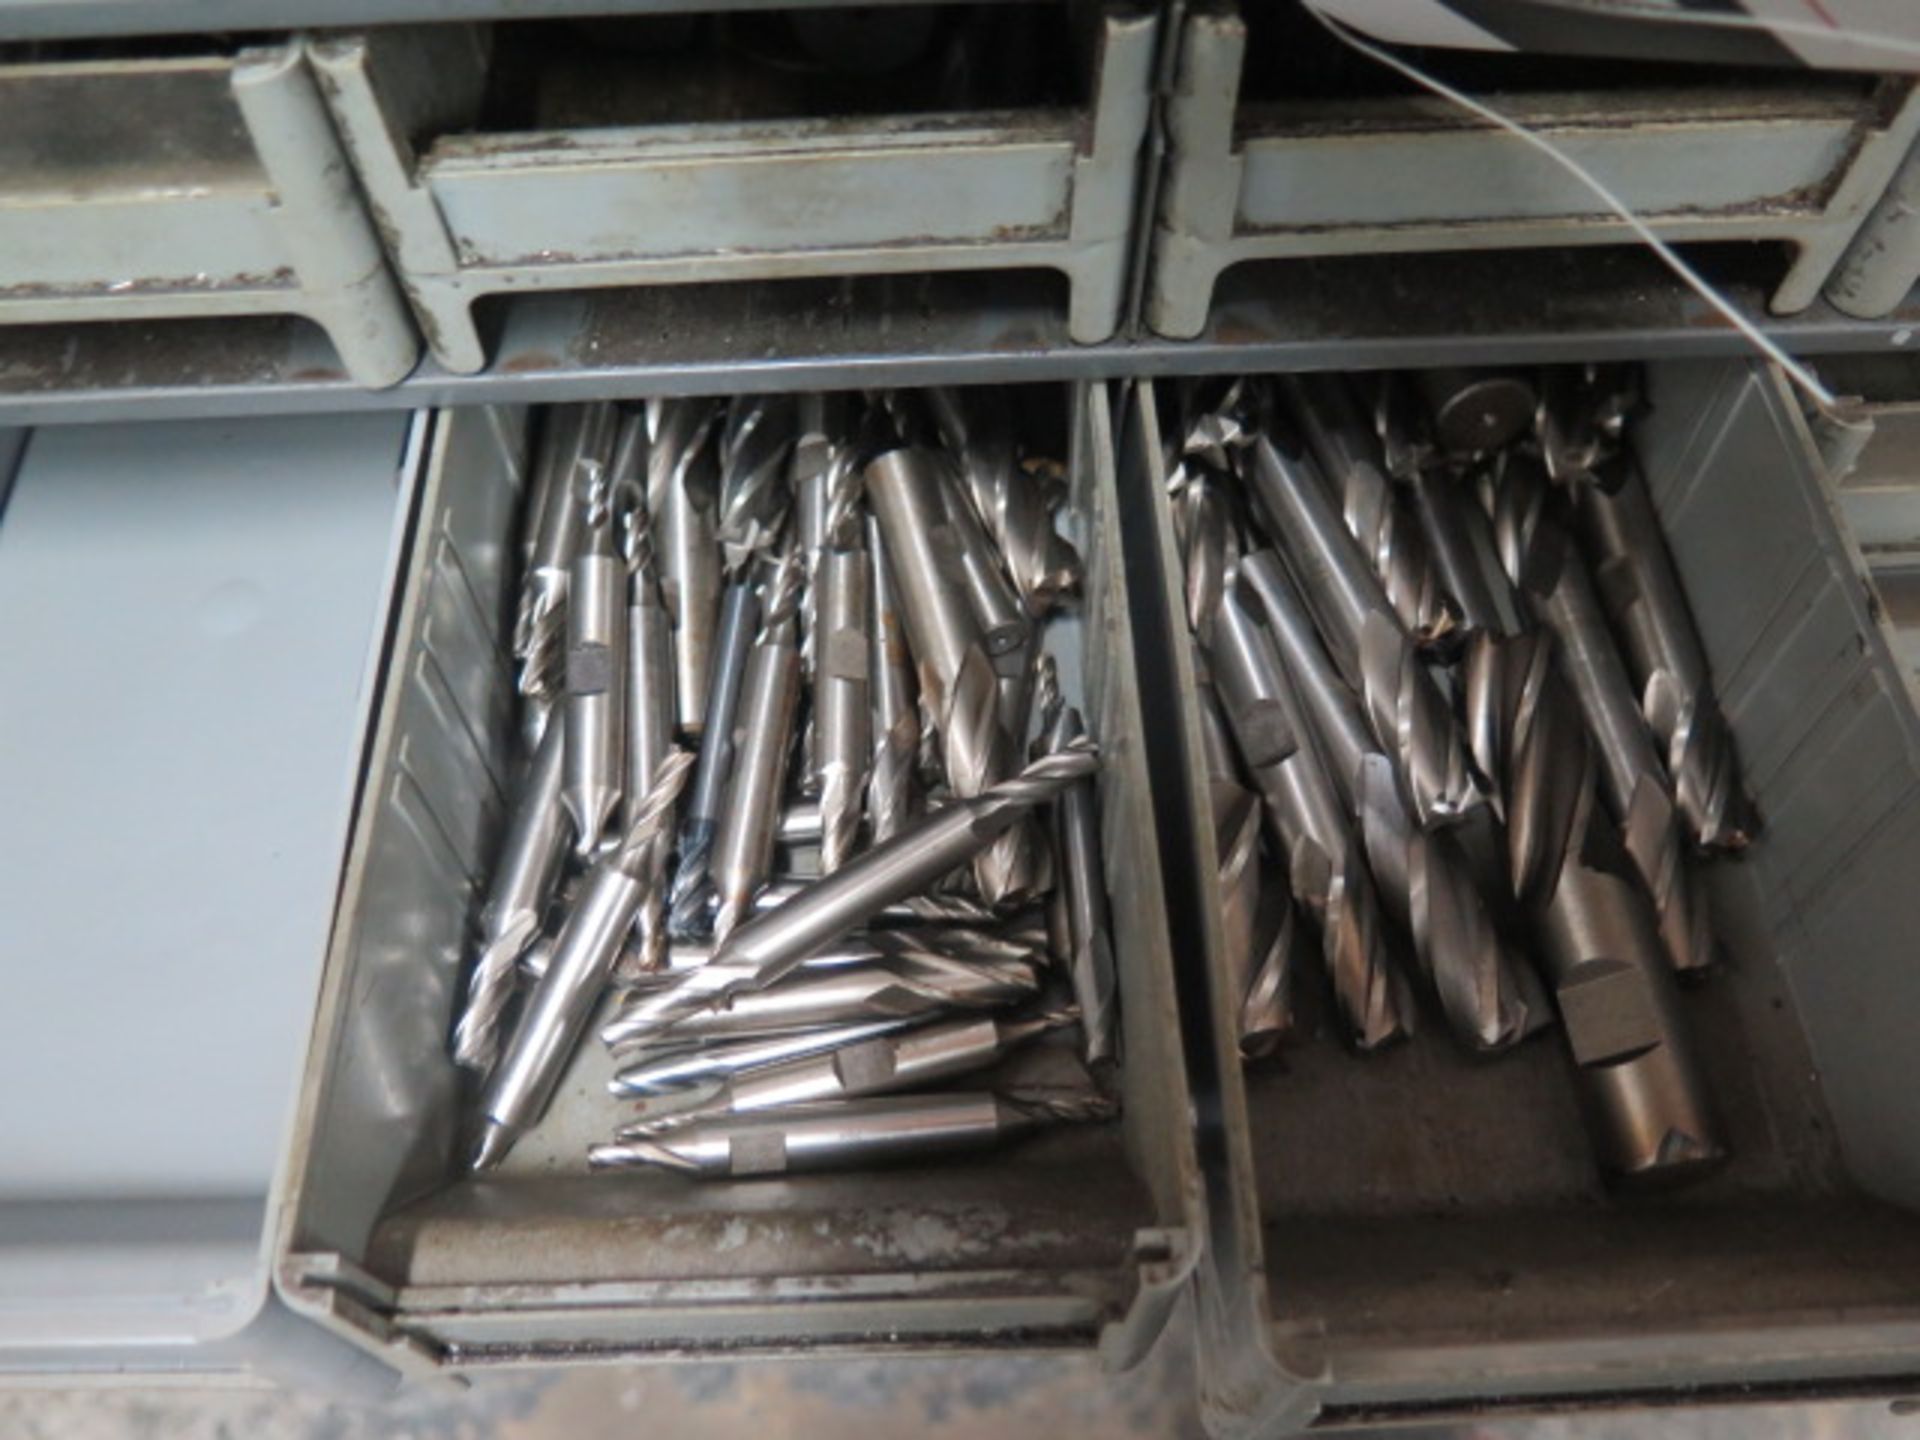 Carbide and High Speed Endmills, Carbide Inserts, Mill Slot Cutters and Hardware w/ Cabinets (SOLD - Image 5 of 8